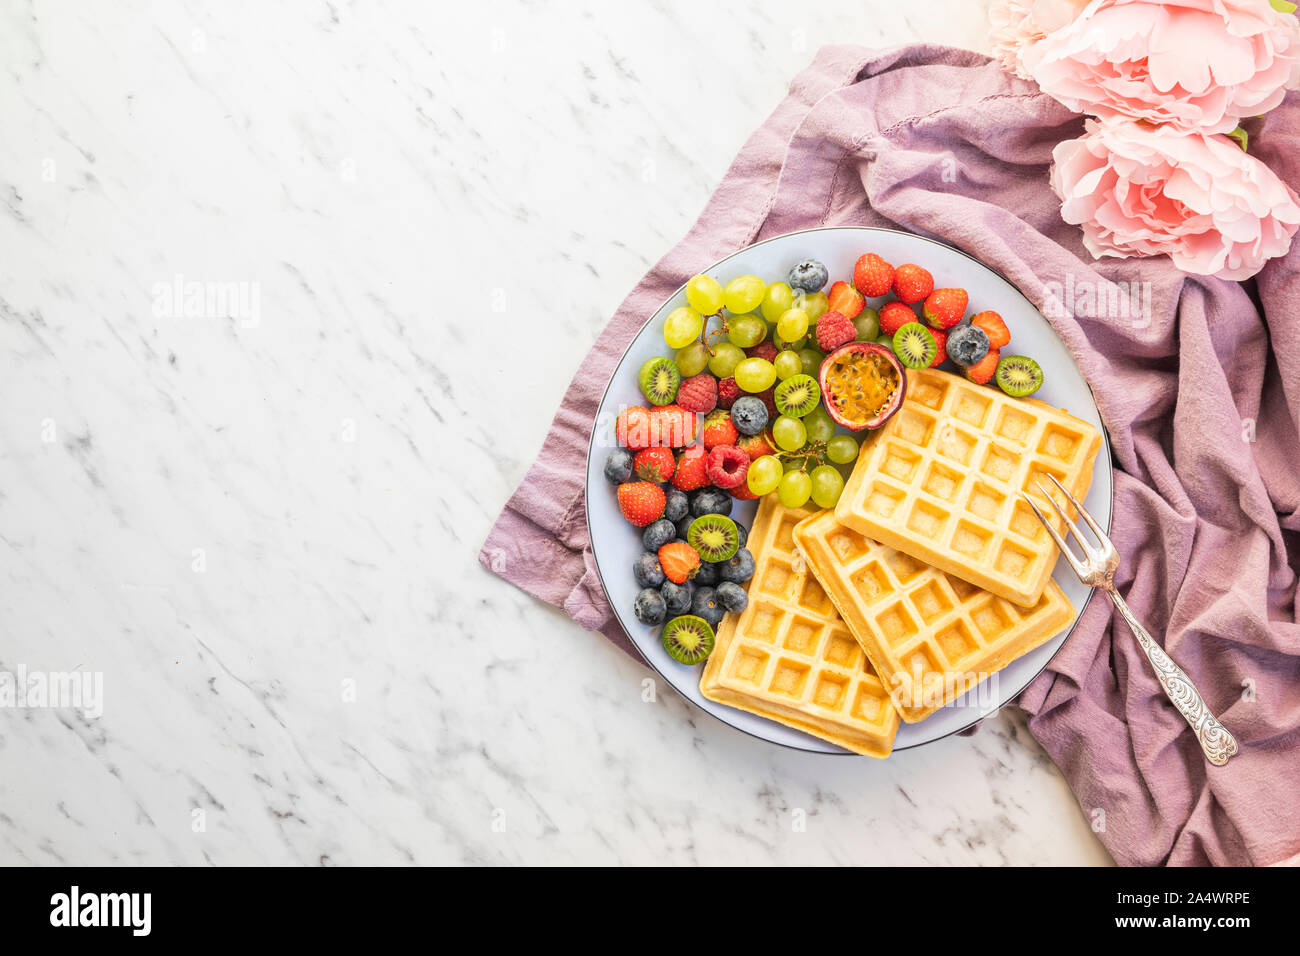 https://c8.alamy.com/comp/2A4WRPE/a-plate-with-fresh-fruit-and-belgian-waffles-the-fruits-are-mini-kiwi-strawberries-passion-fruit-grapes-raspberries-and-blueberries-with-a-purpl-2A4WRPE.jpg